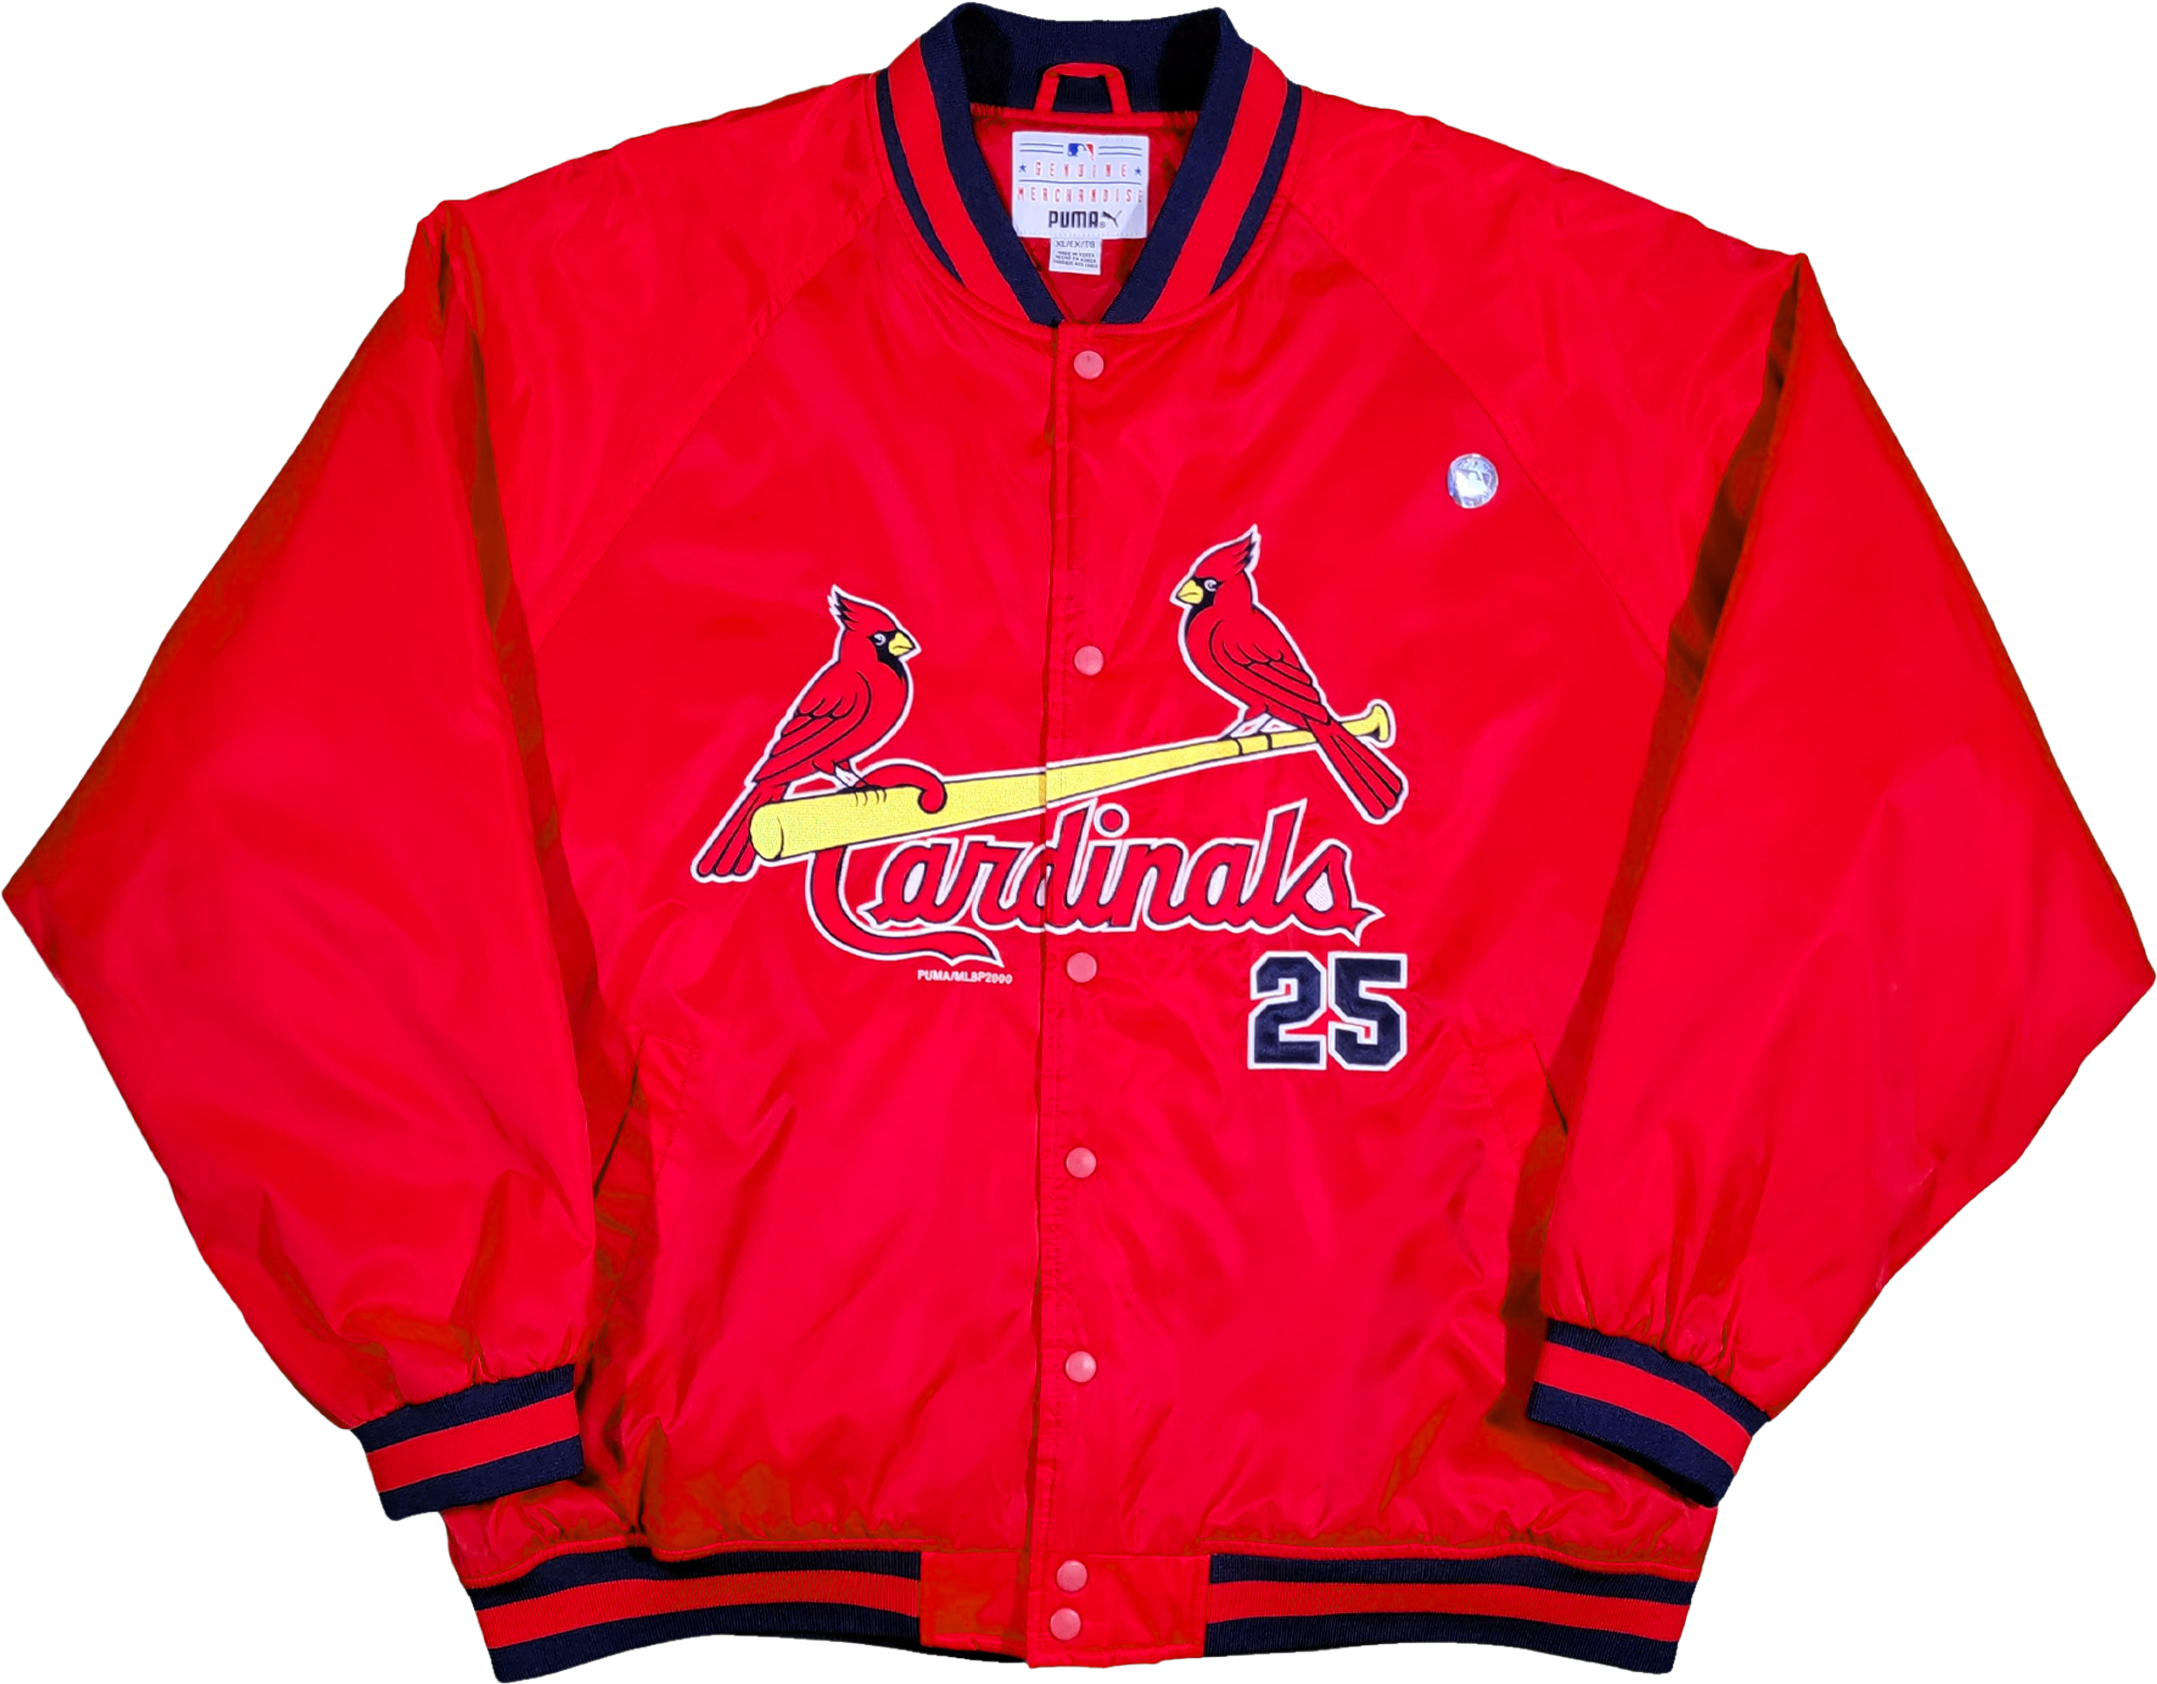 St. Louis Cardinals MLB Merchandise Leather Jacket NWT 